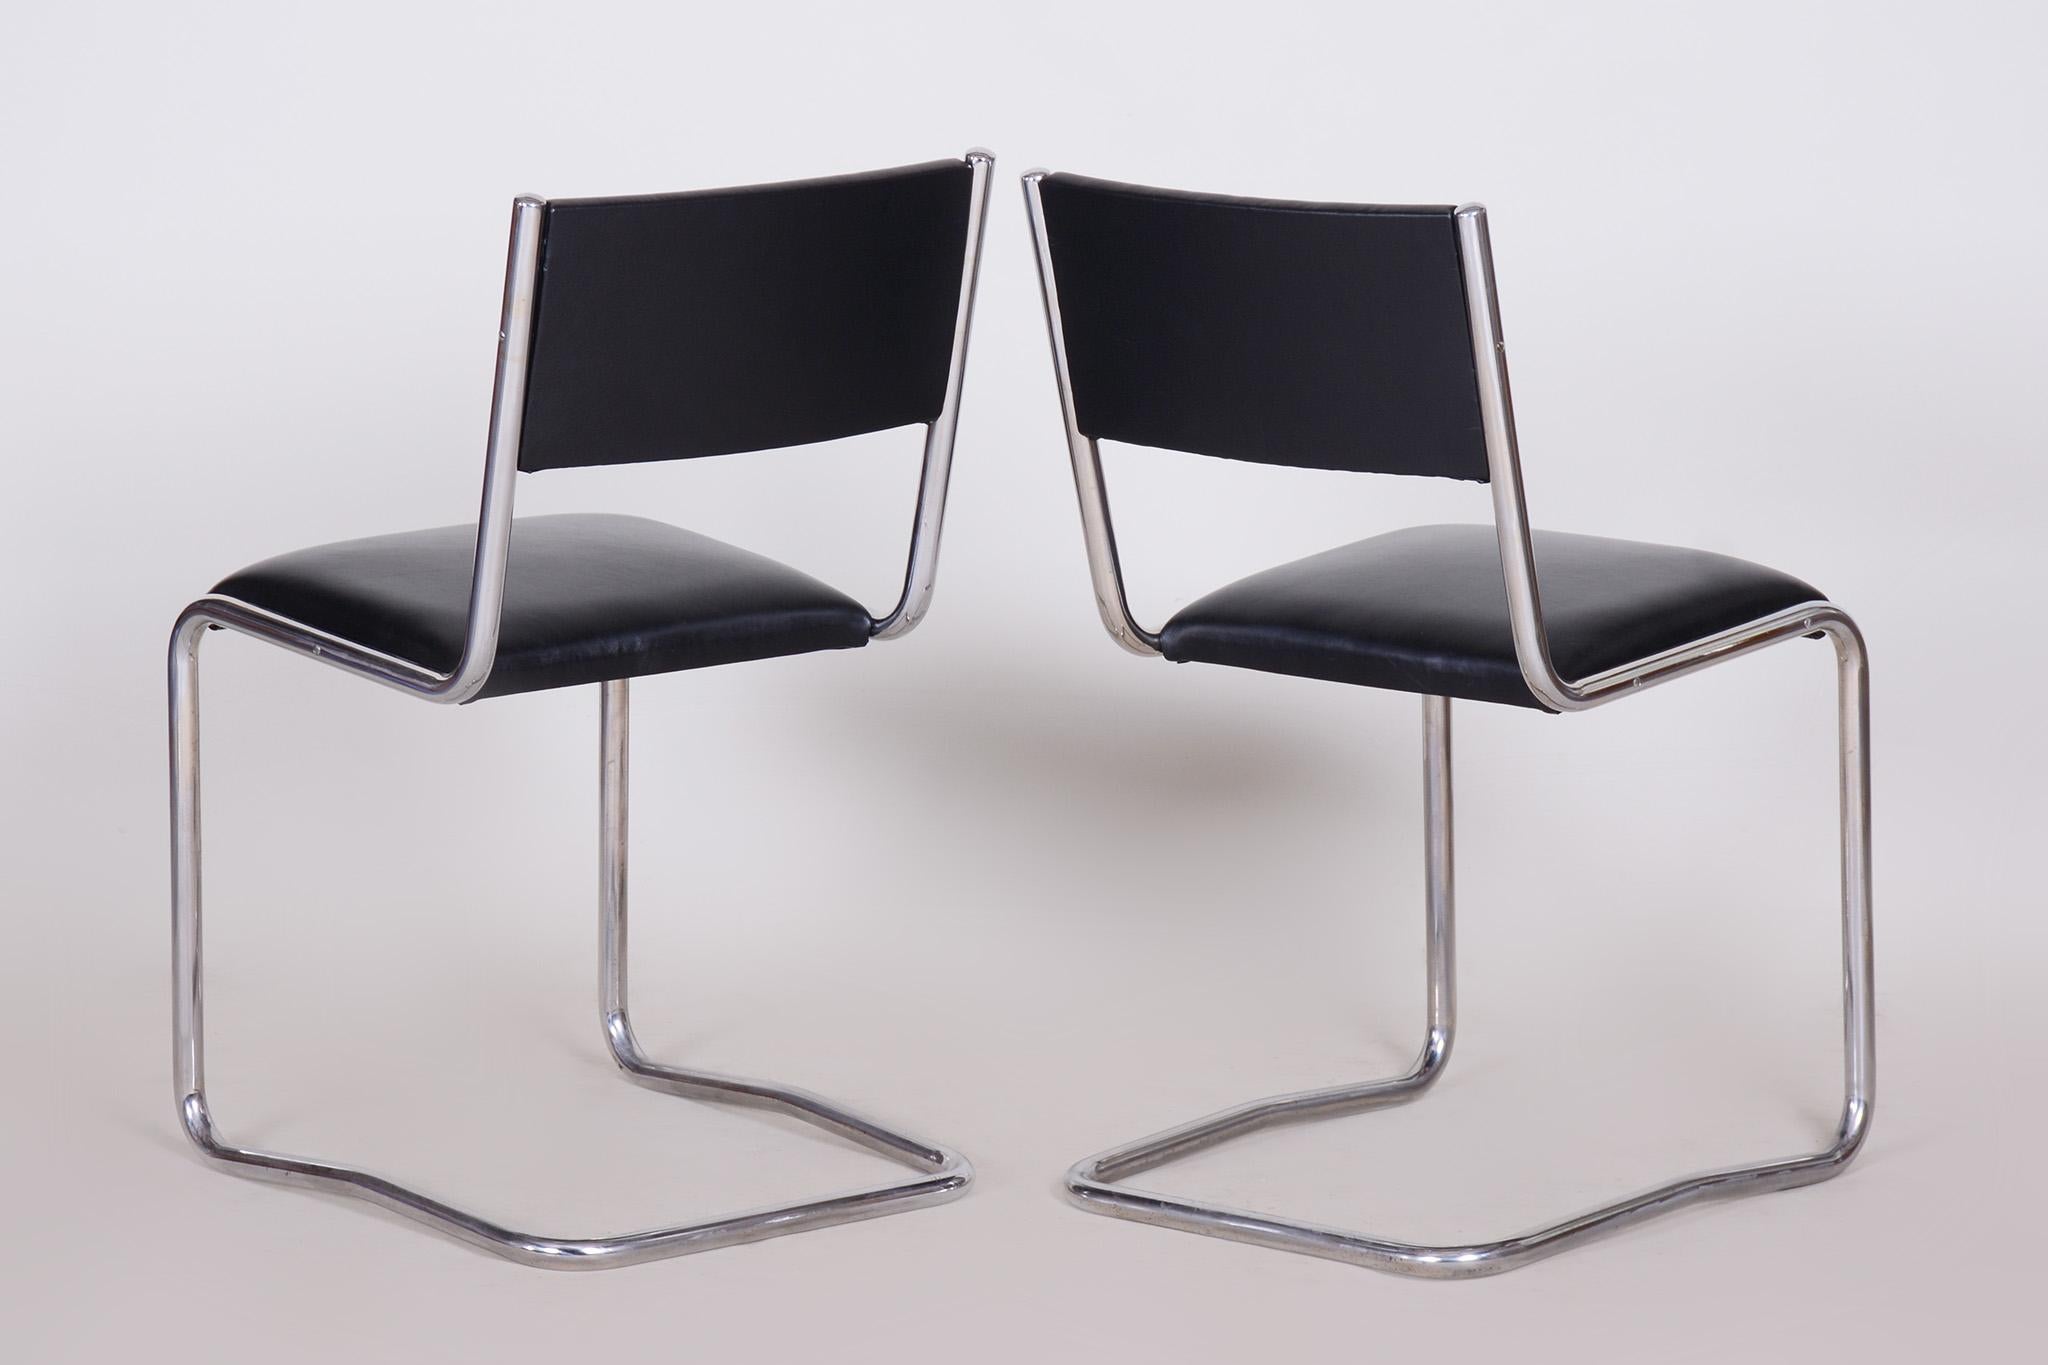 Black Leather Bauhaus Chairs, 1930s Czechia For Sale 7